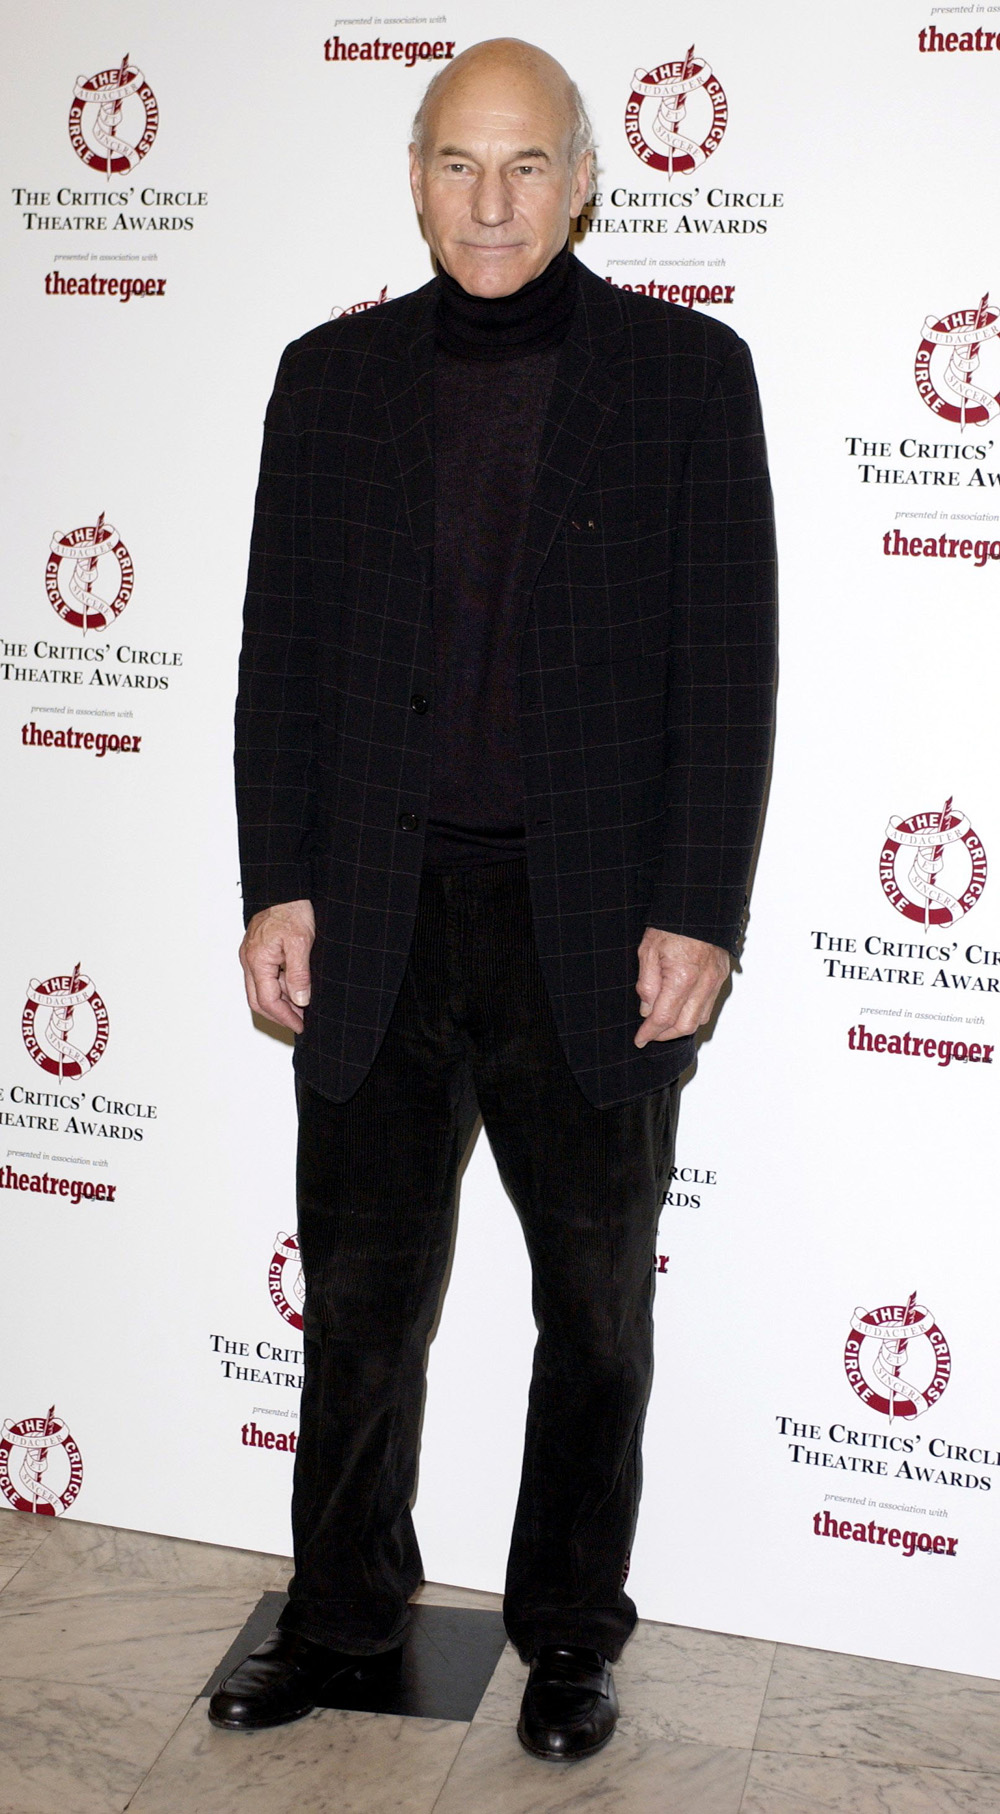 <p>Patrick Stewart is handsome at the Critics Circle Theater Awards in London on Feb. 3, 2004. He gave the cameras a shy smile.</p>